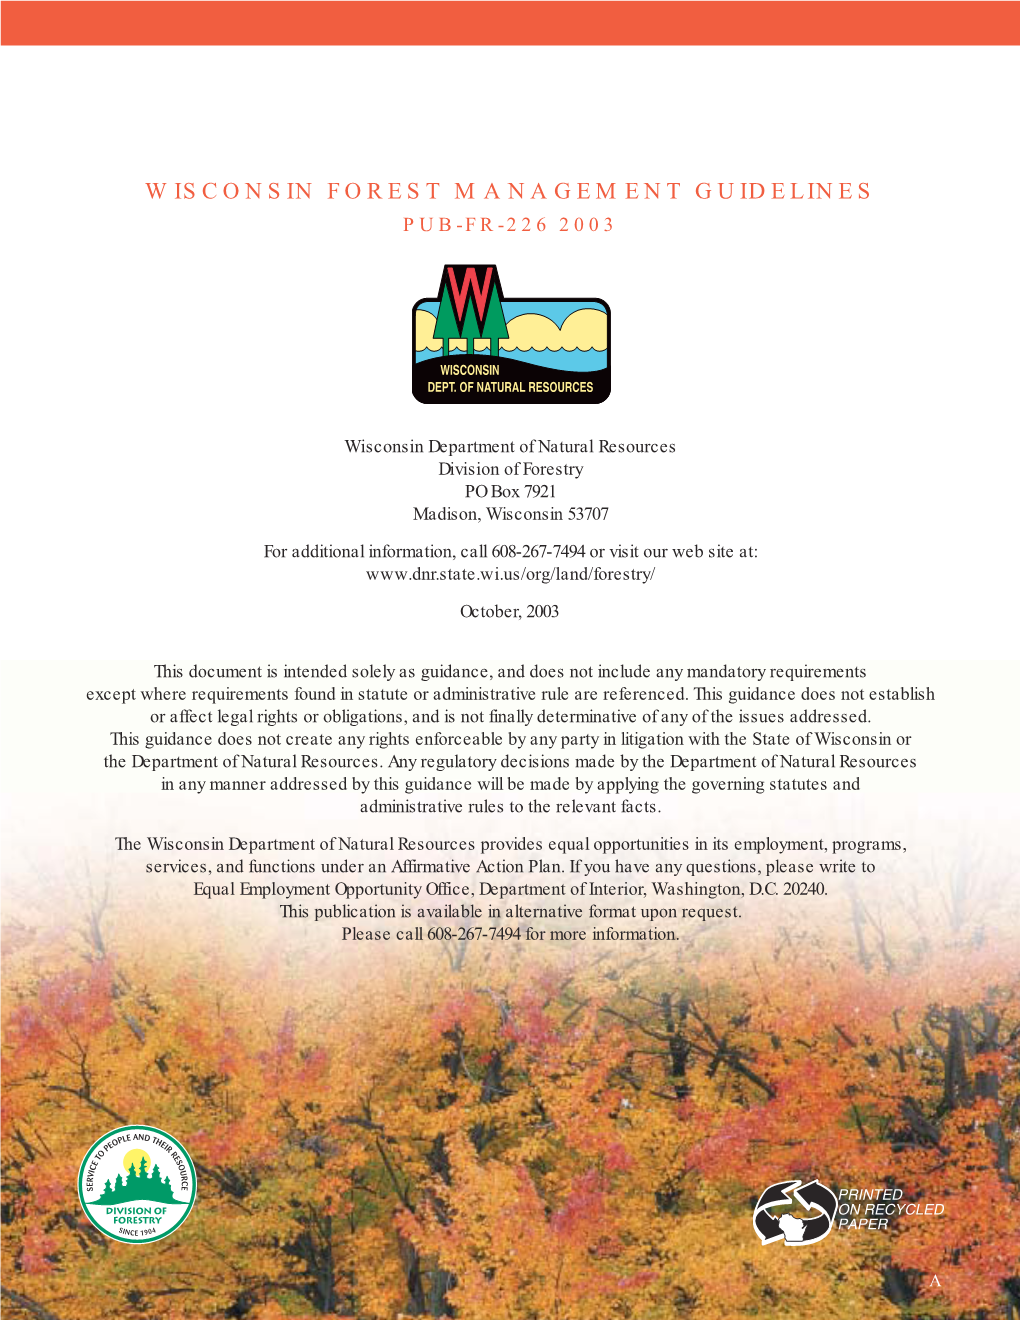 Wisconsin Forest Management Guidelines Pub-Fr-226 2003